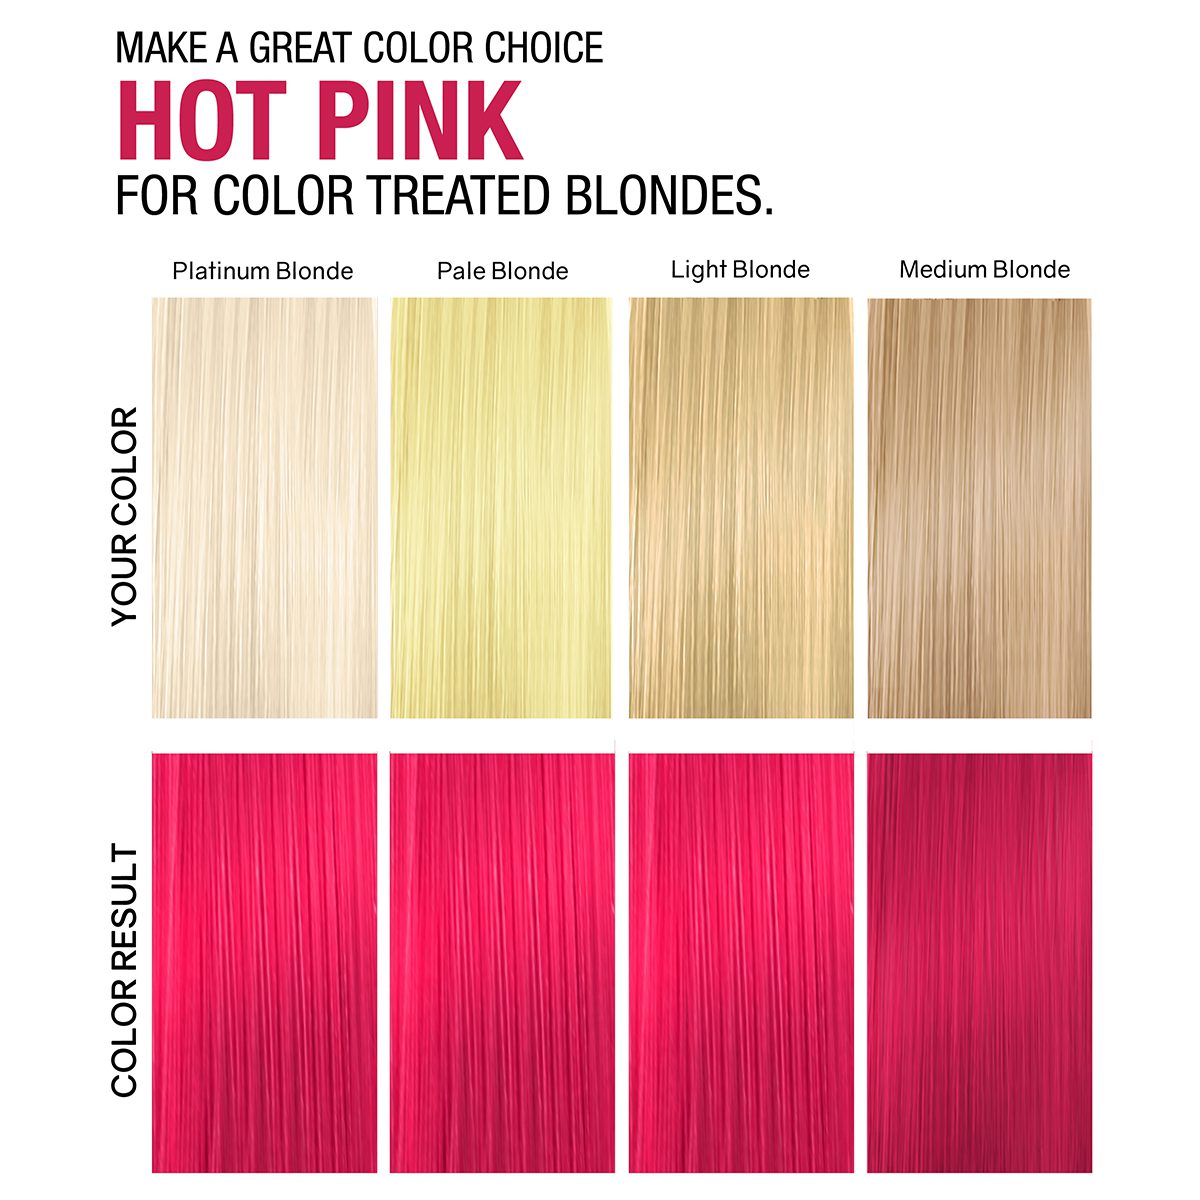 Hot Pink Conditioner | For A Hot Pink Tone | No Fade Fresh